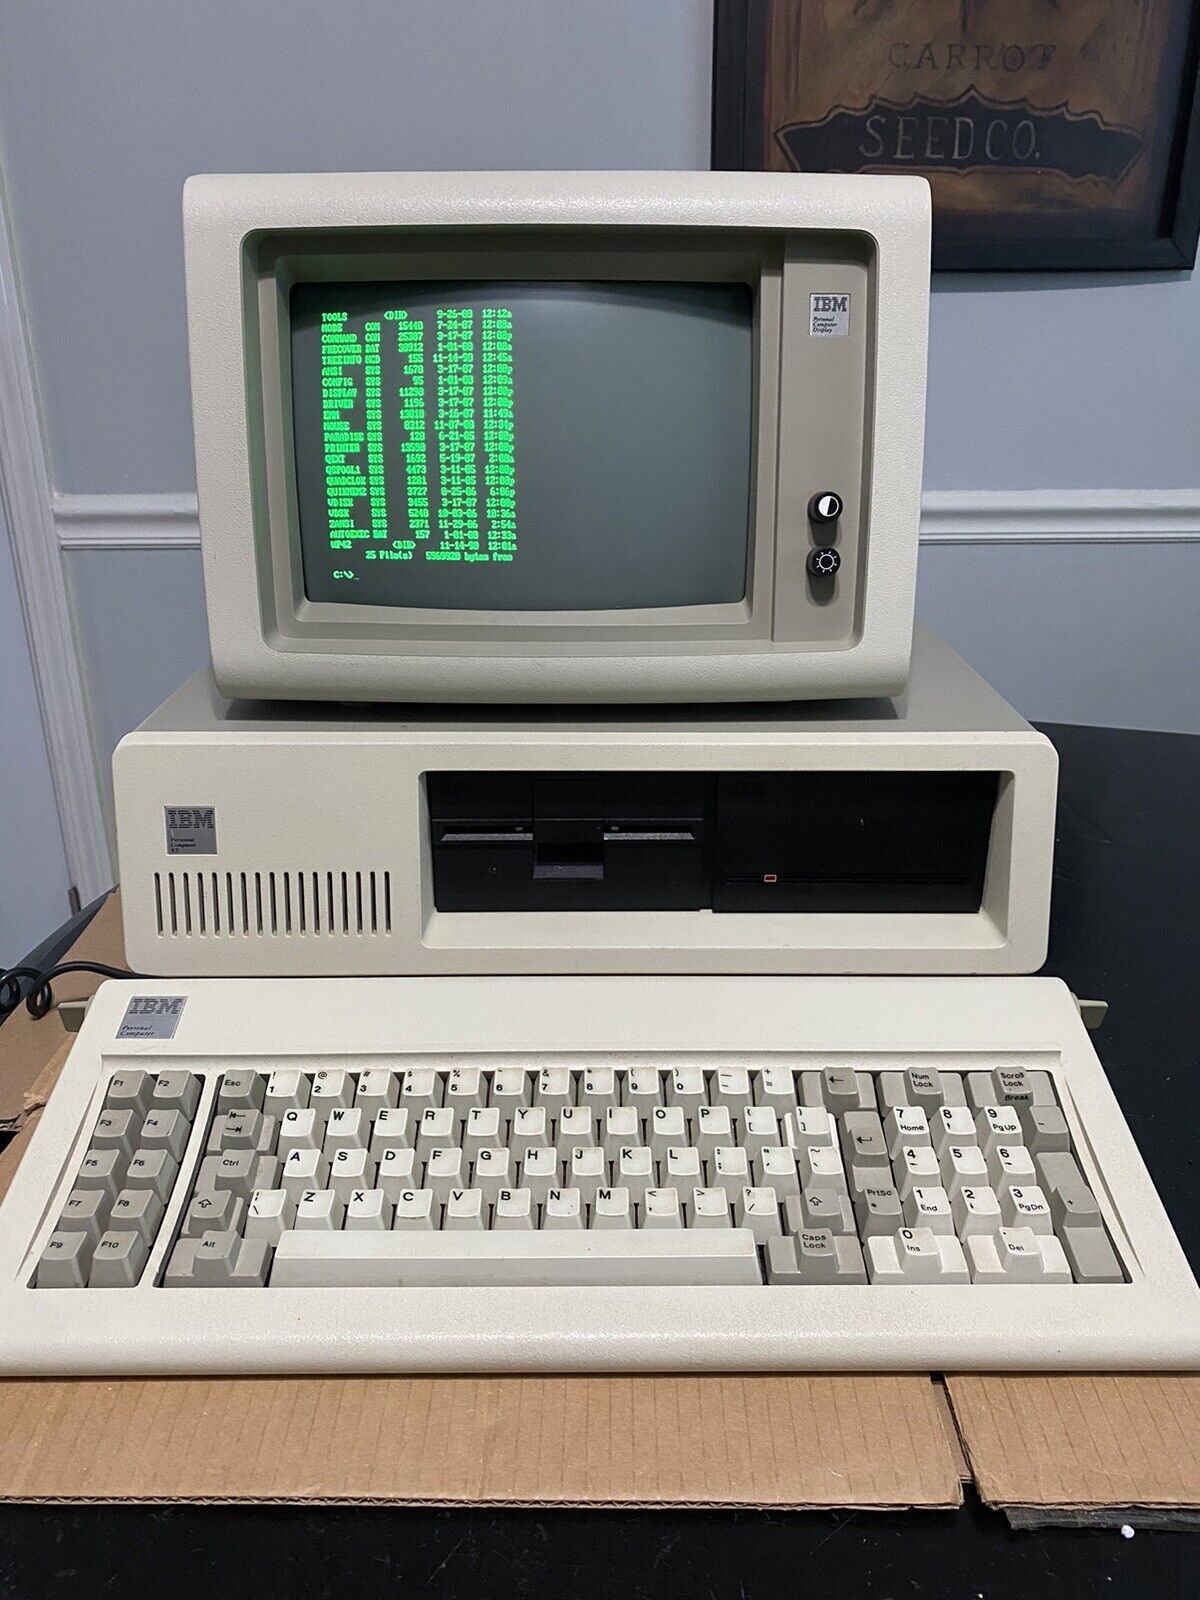 IBM Personal Computer 5160 with 5151 Monochrome Monitor, Model F XT Keyboard